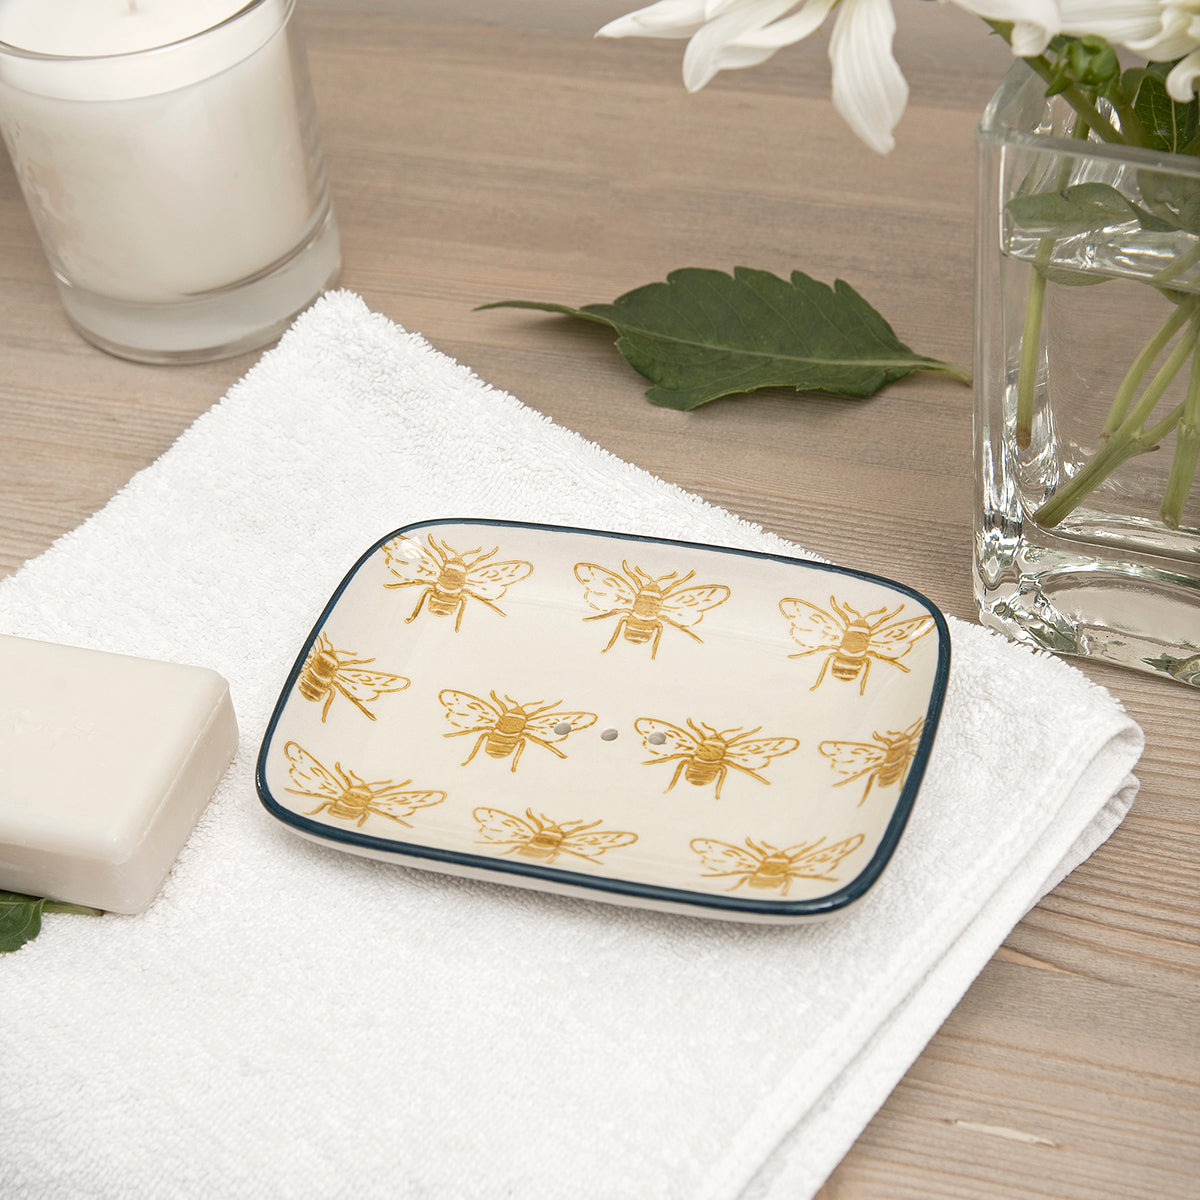 Bees Stoneware Soap Dish by Sophie Allport